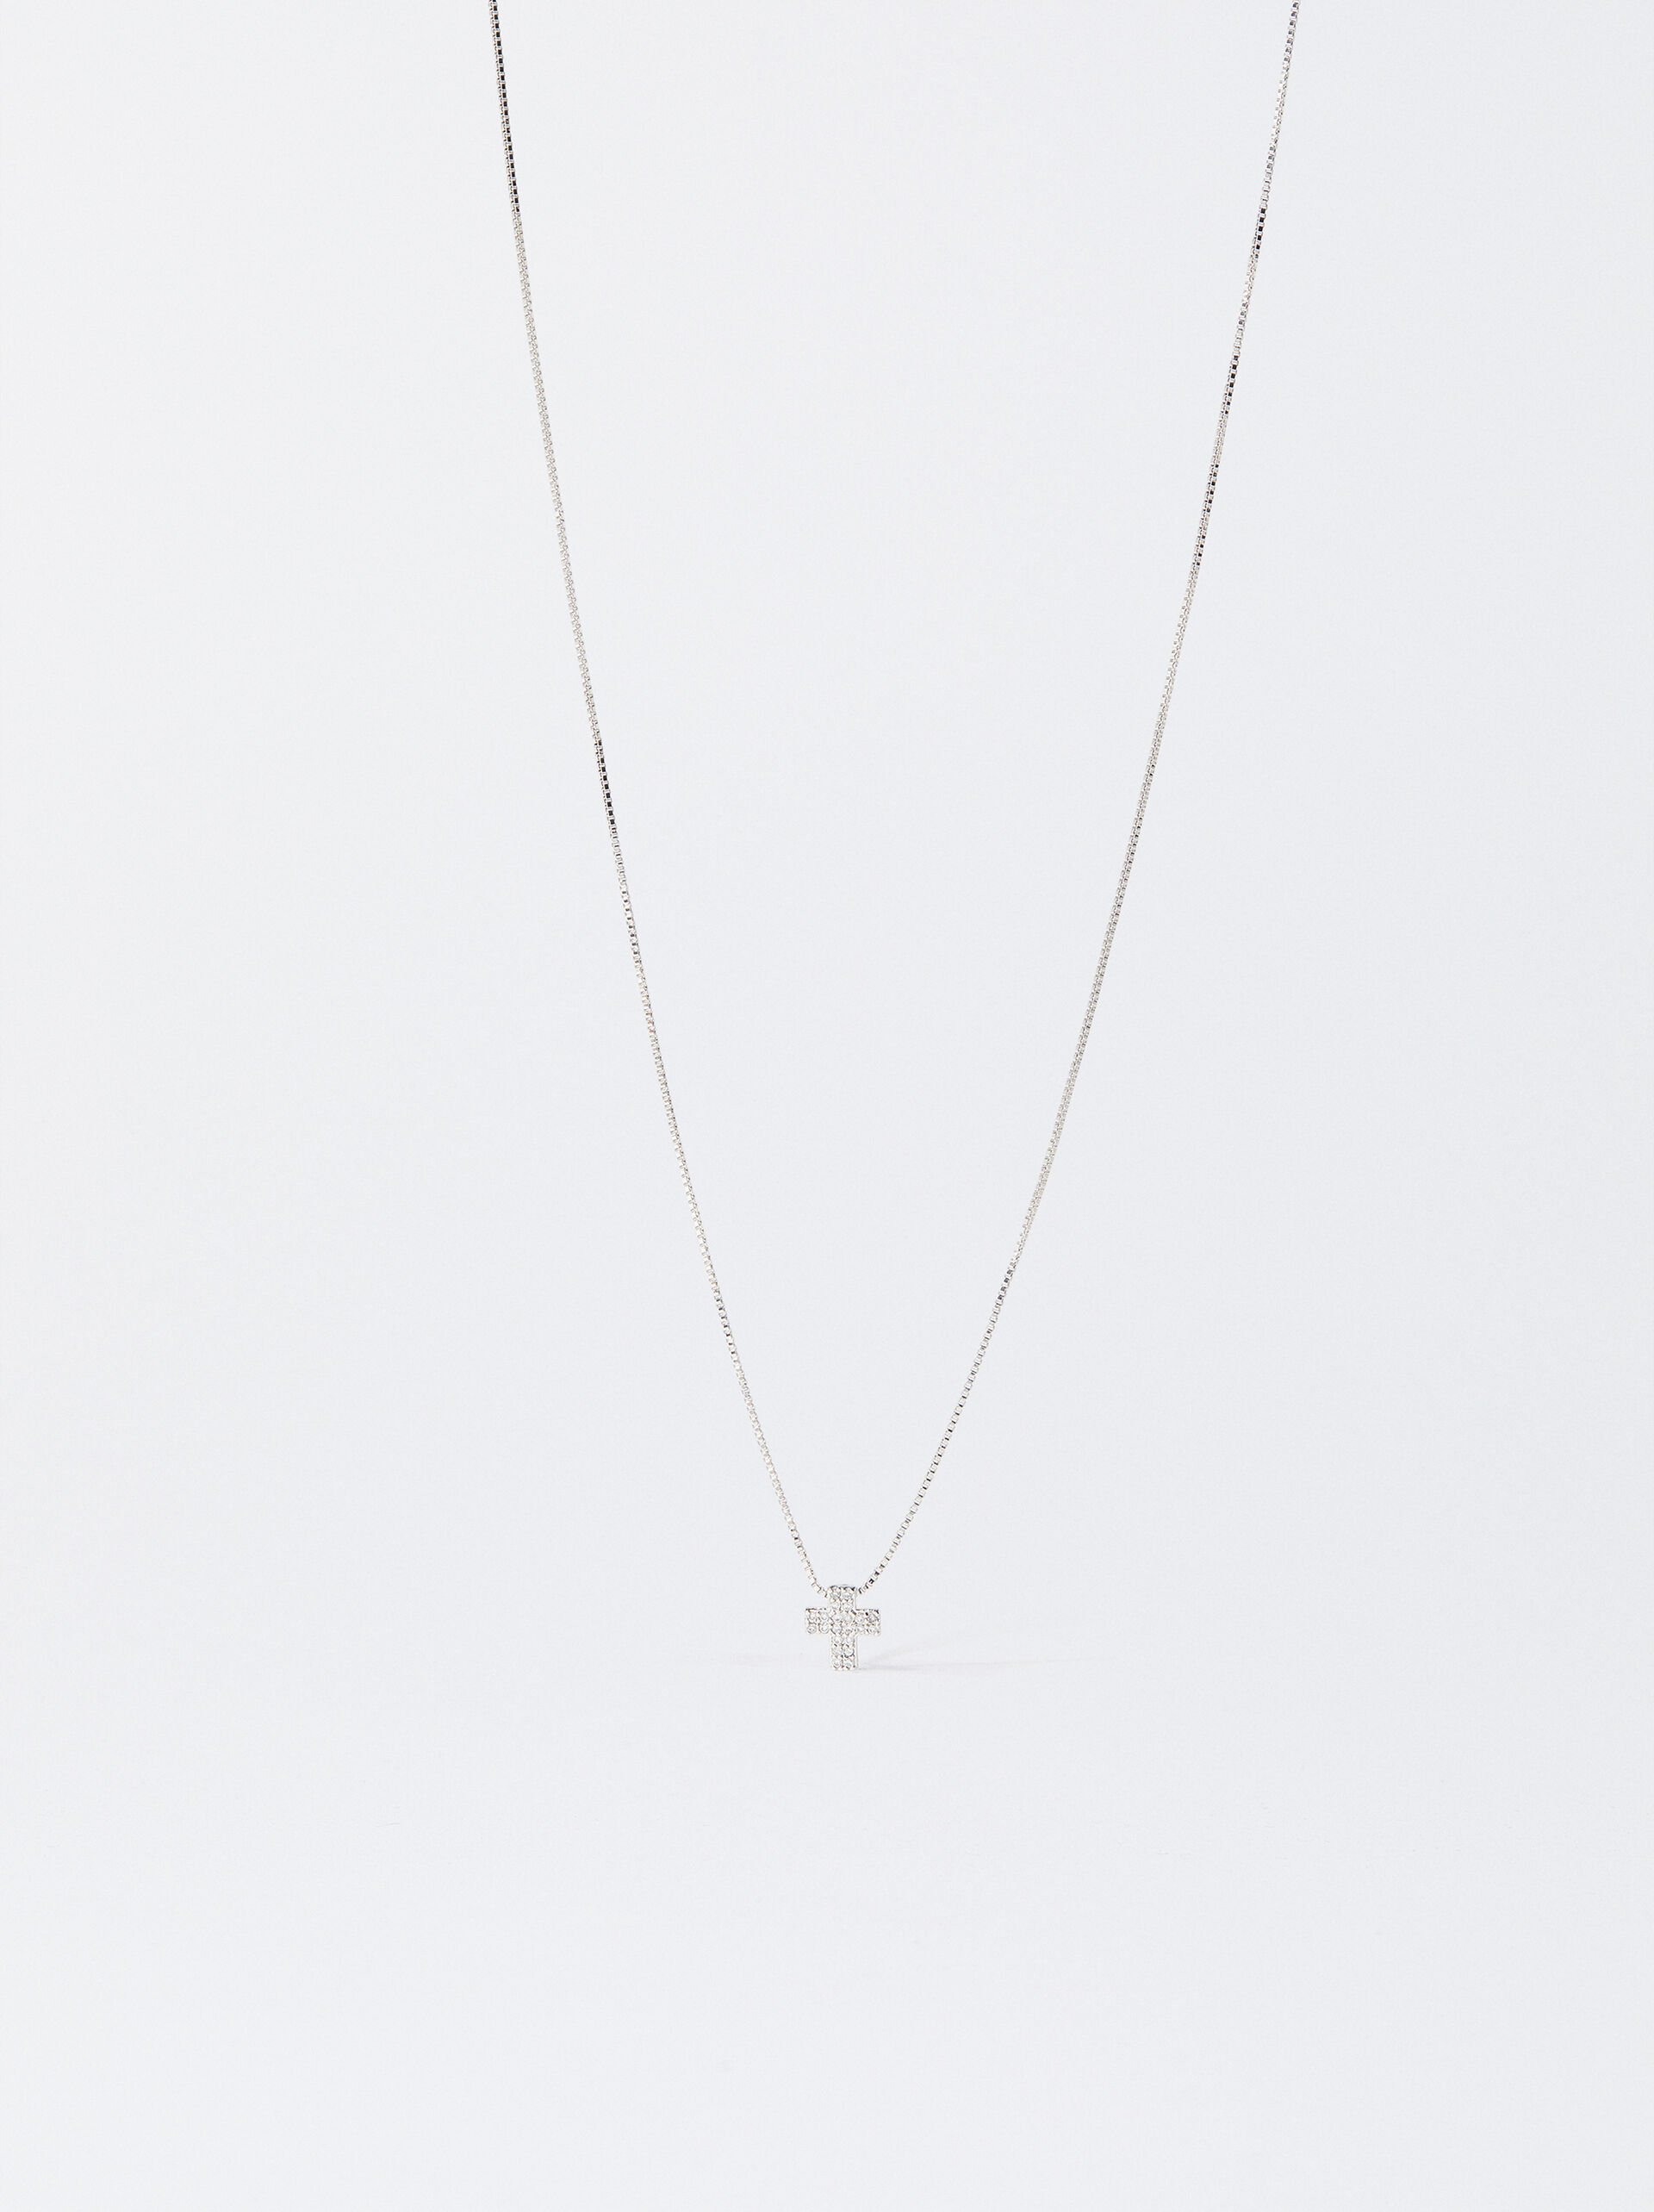 Silver Necklace With Cross And Zirconias image number 0.0